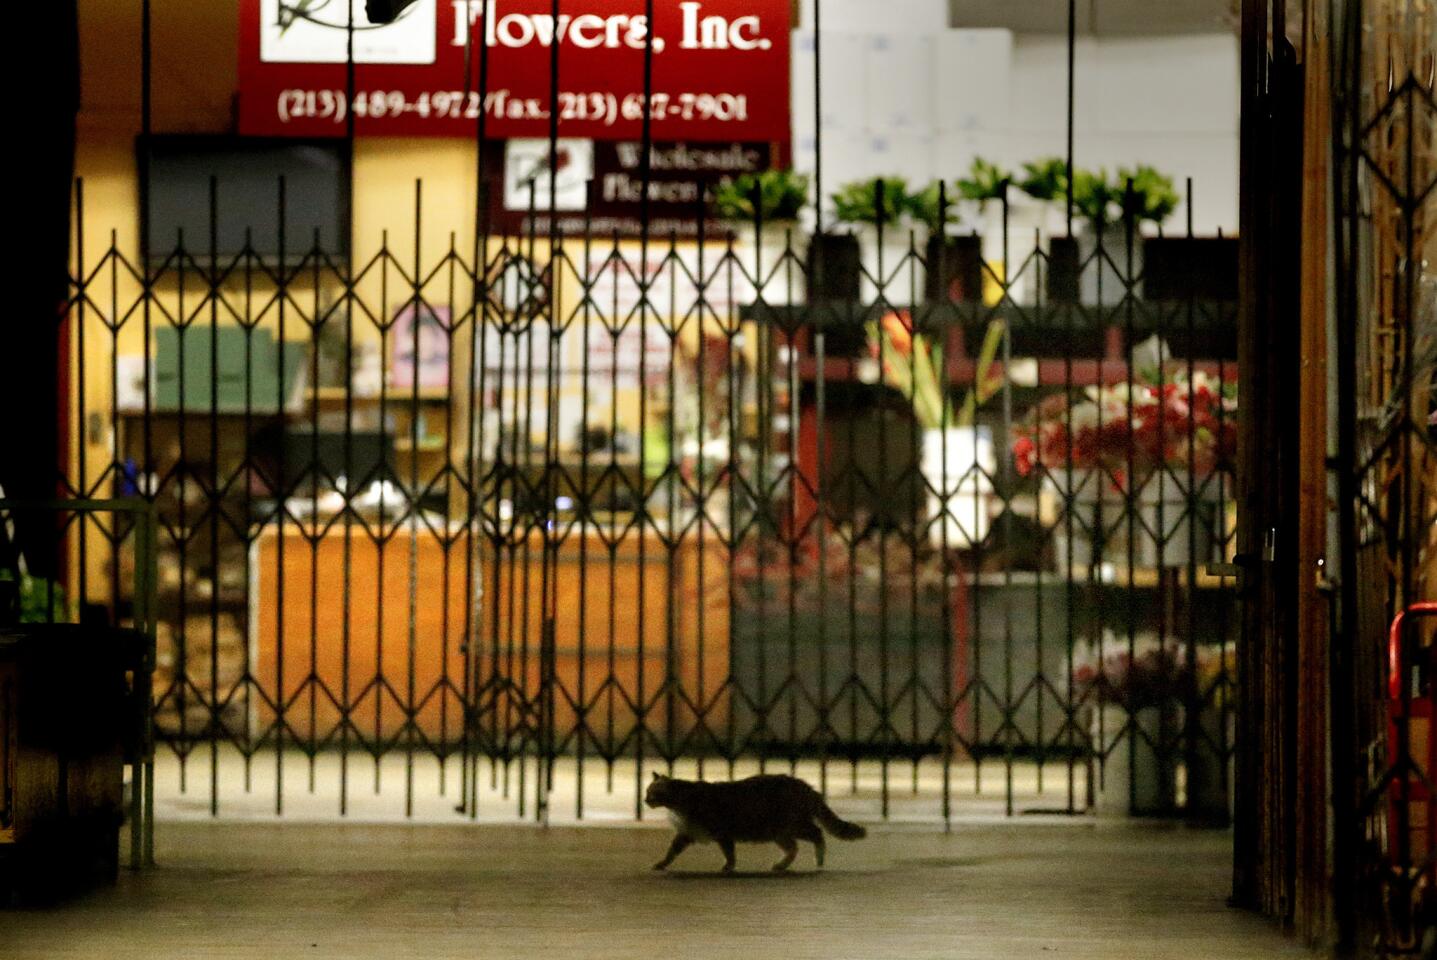 Several hours after the customers and merchants have gone home and the lights are dim, the cats start their patrol in the Los Angeles Flower Market June 25, 2015. The Working Cats program is using unsocialized "feral" cats in a program to keep rodents away from the market.